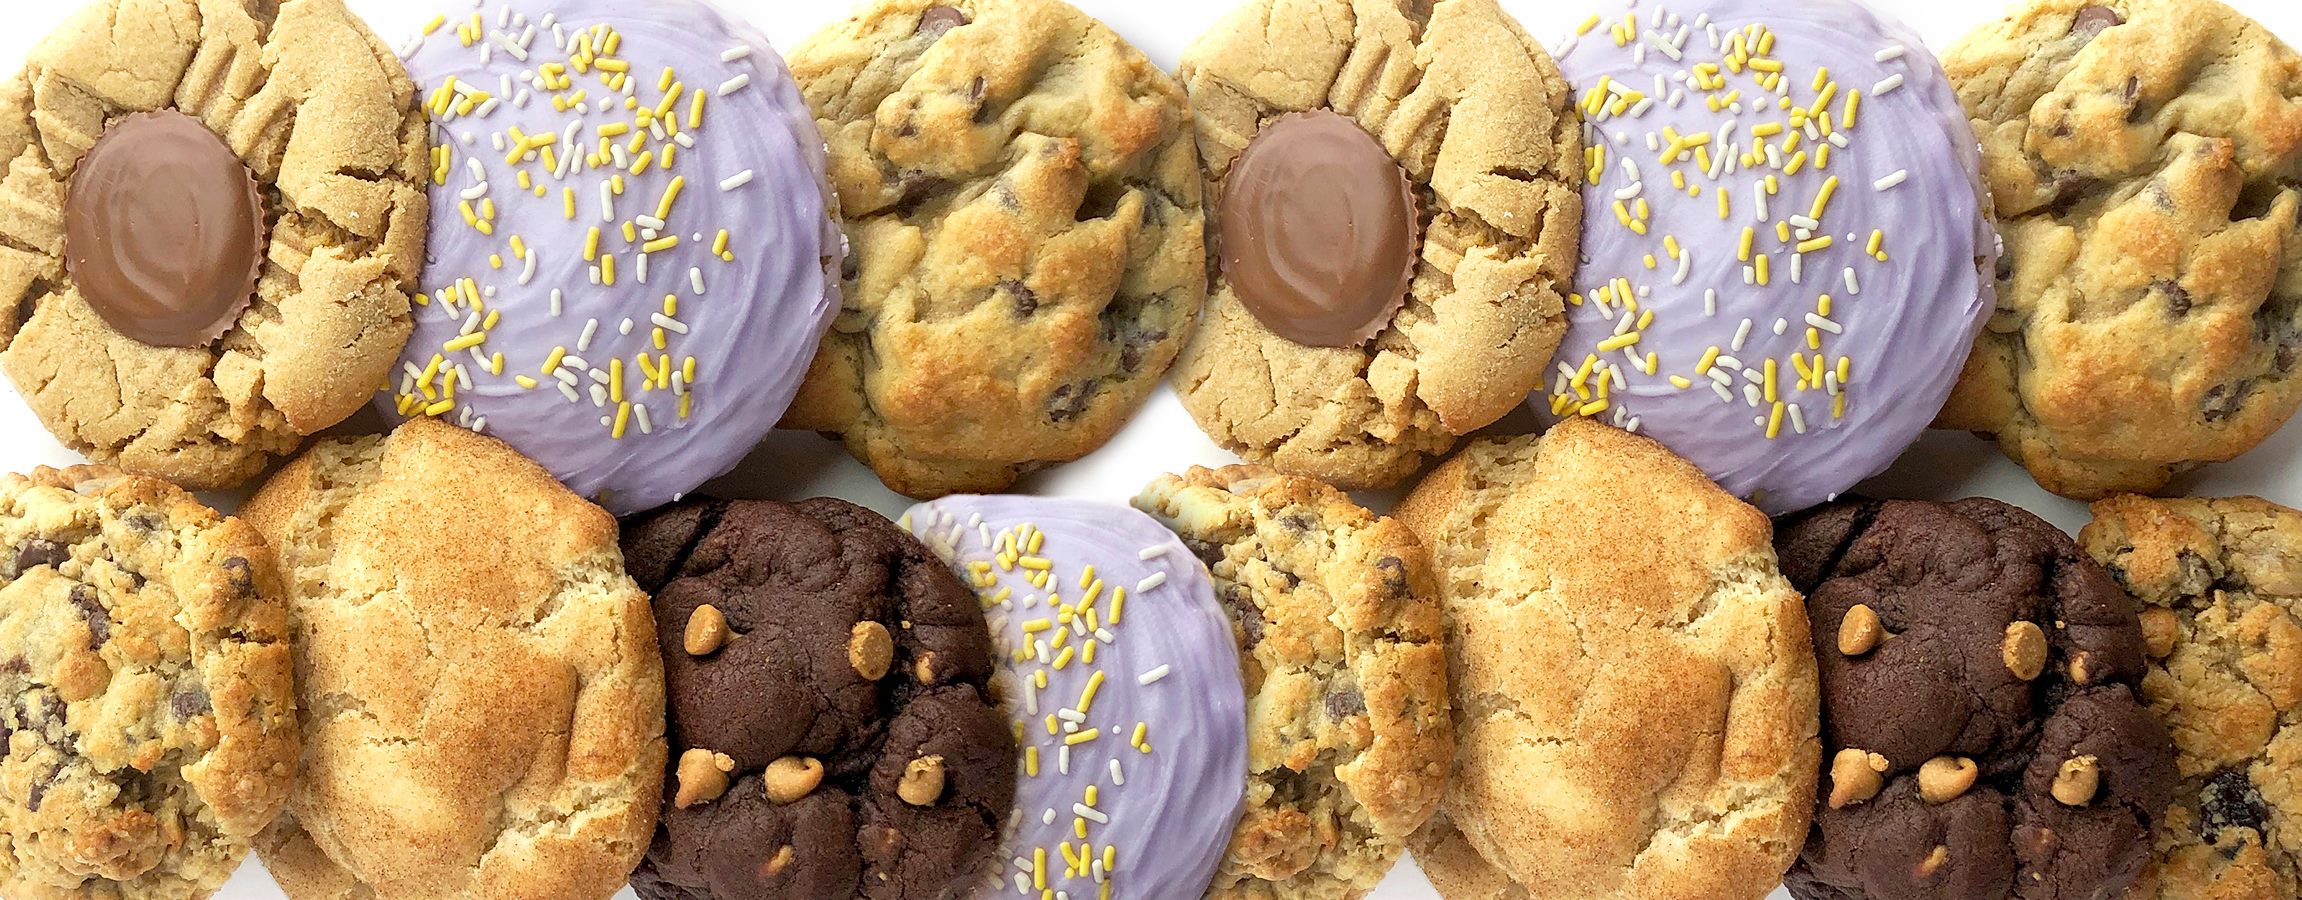 The Cookie Place - Cookie Delivery Near Me - Order Now!